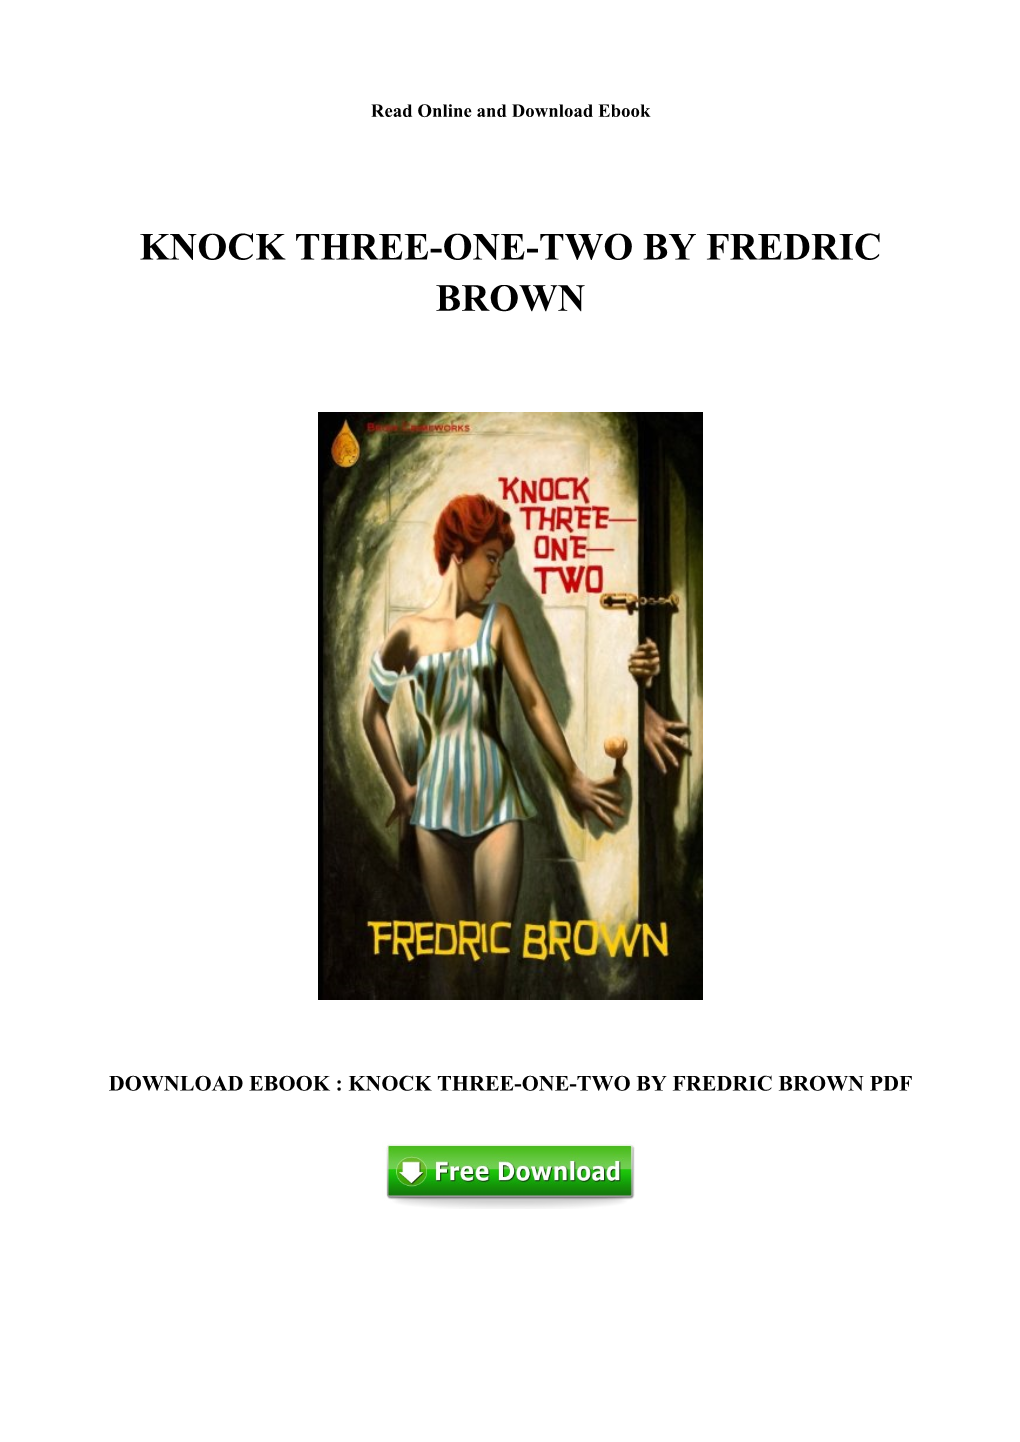 Download Knock Three-One-Two by Fredric Brown